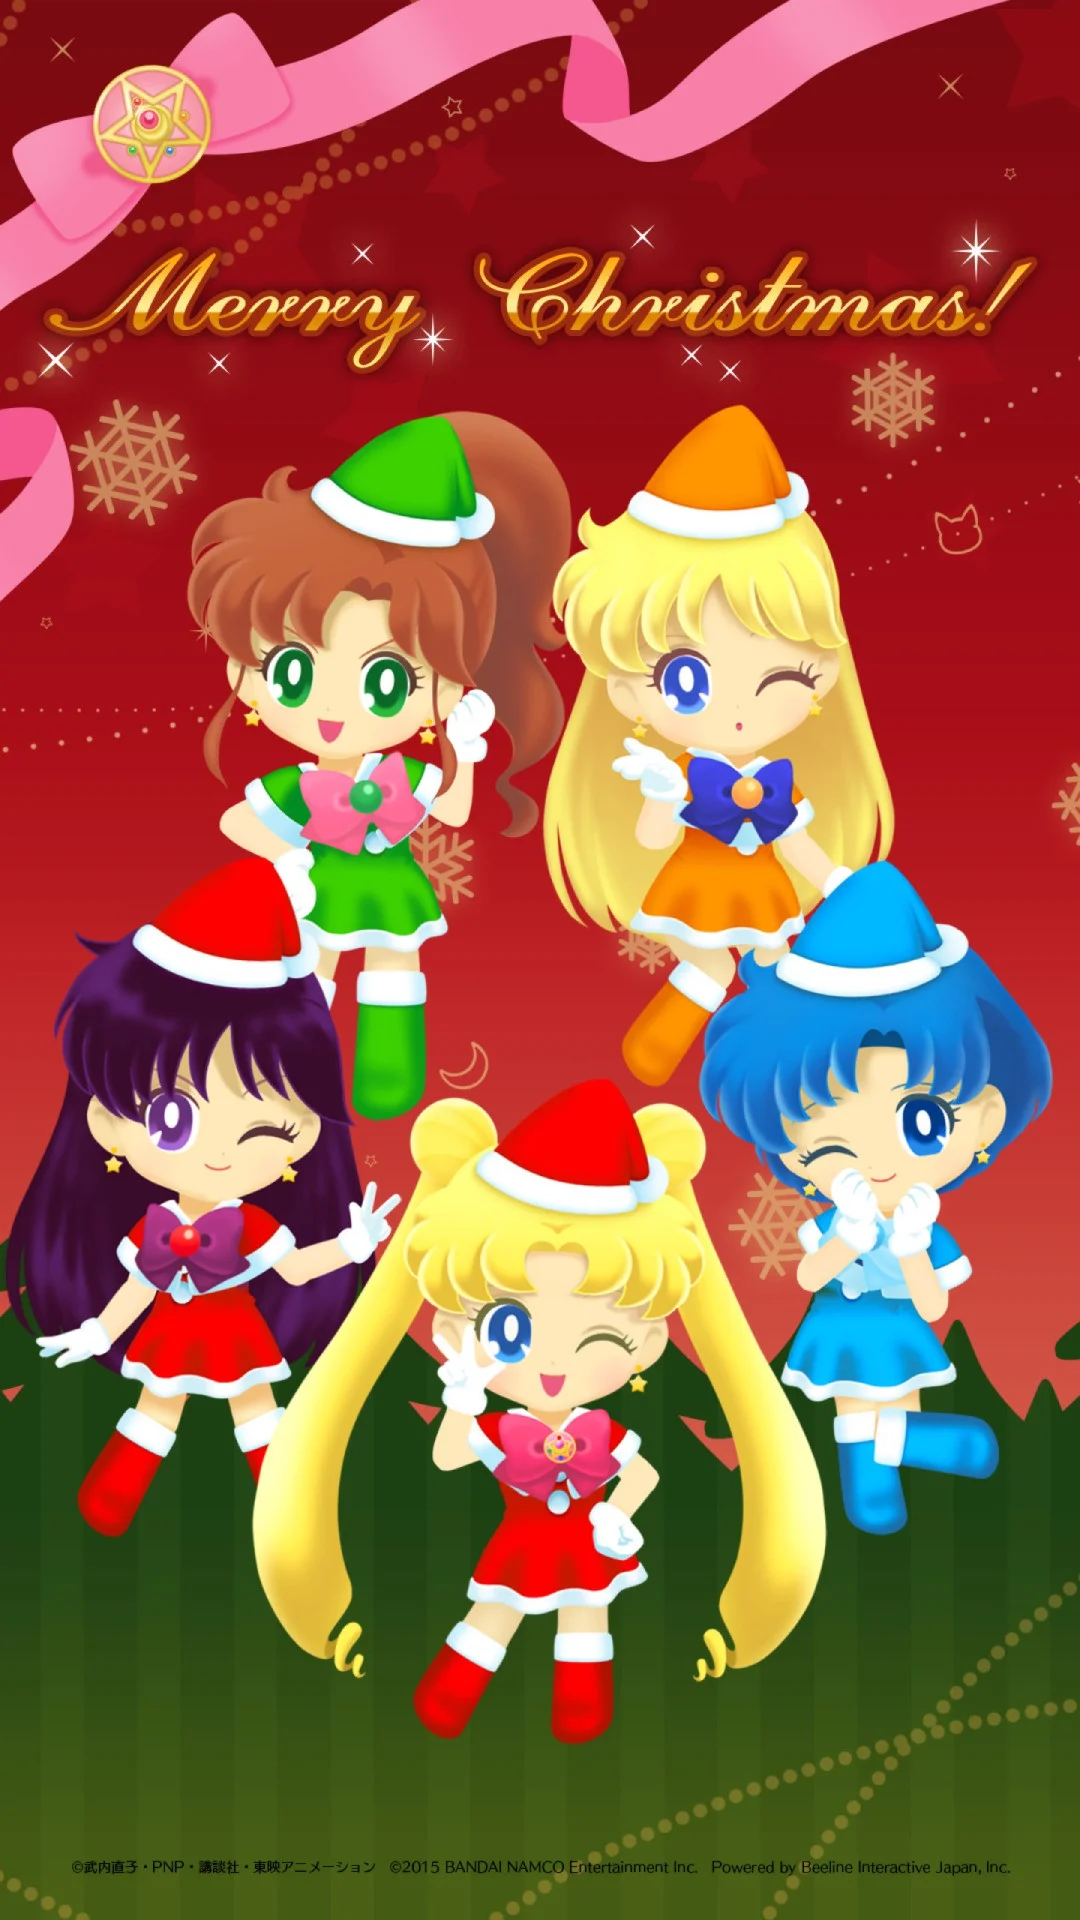 Wallpaper from Christmas event by Sailor moon drop game